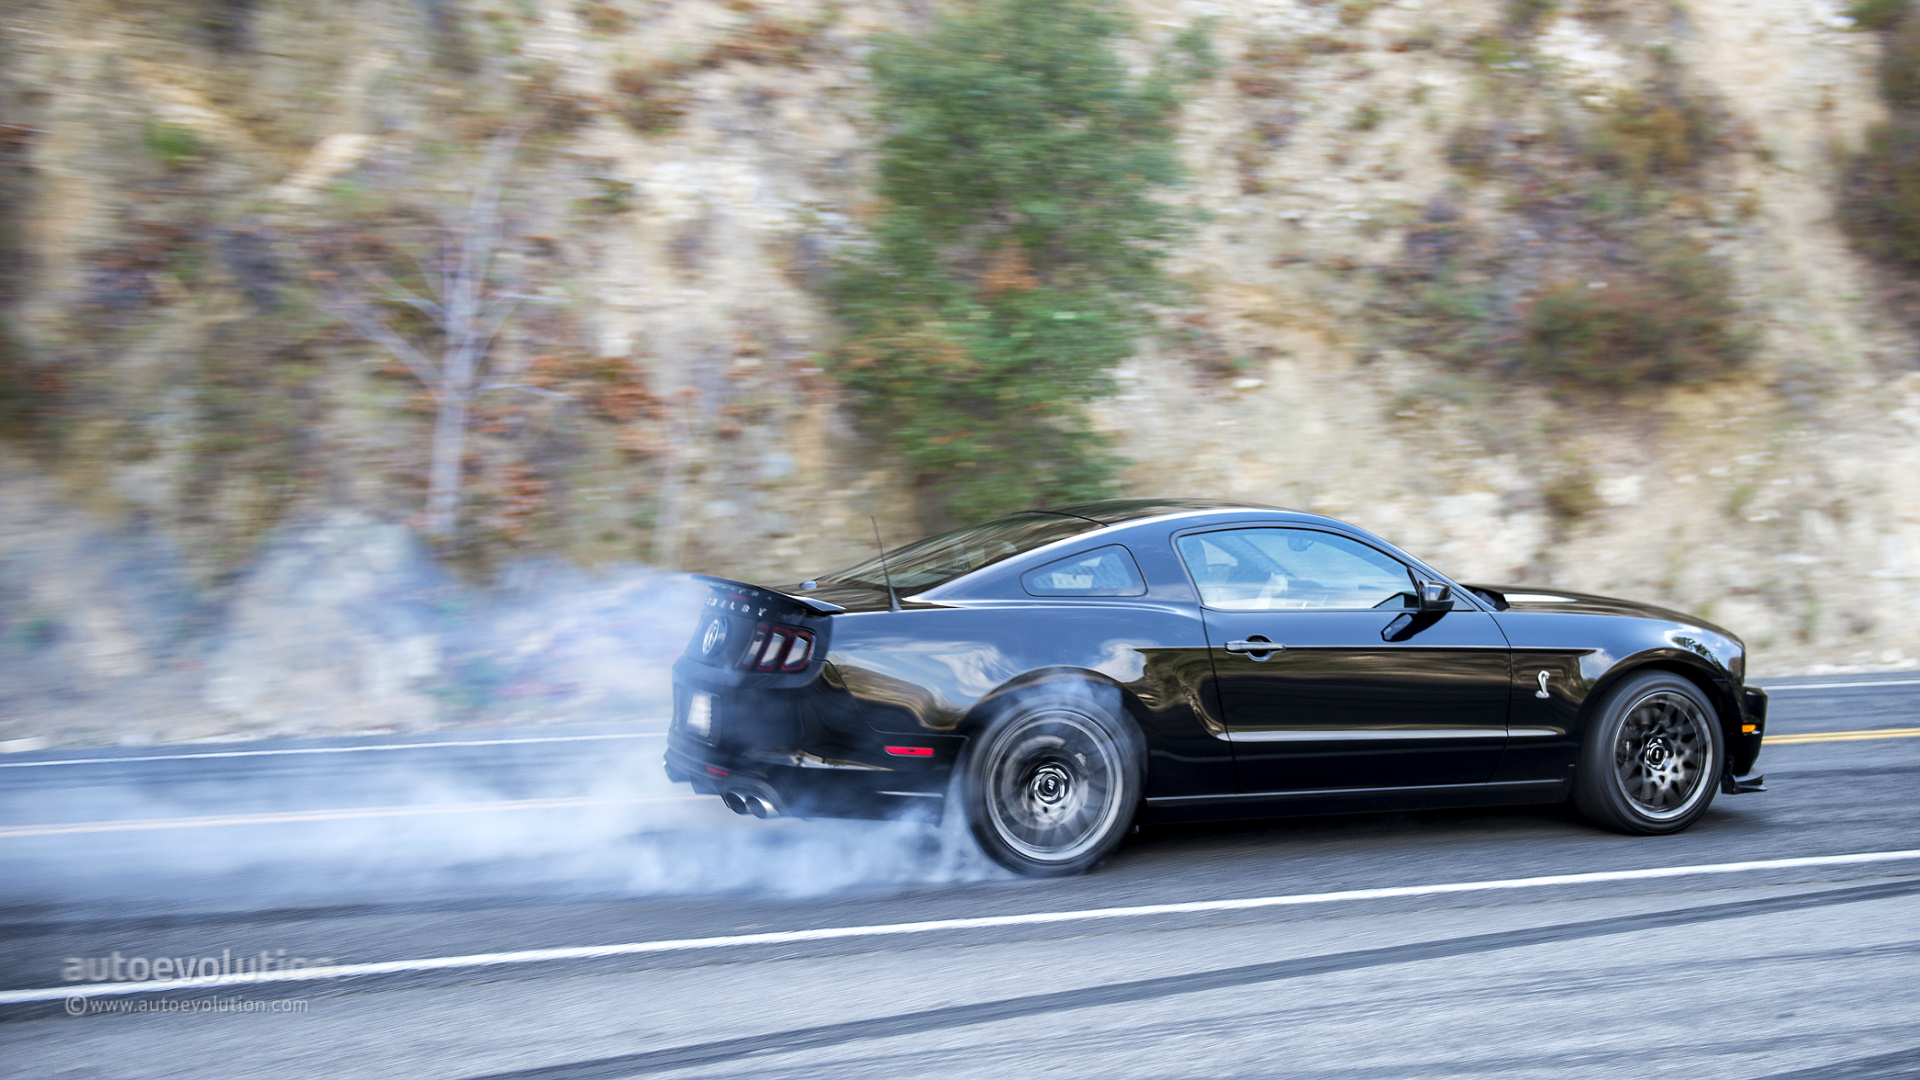 Ford Mustang Gt500 Wallpapers